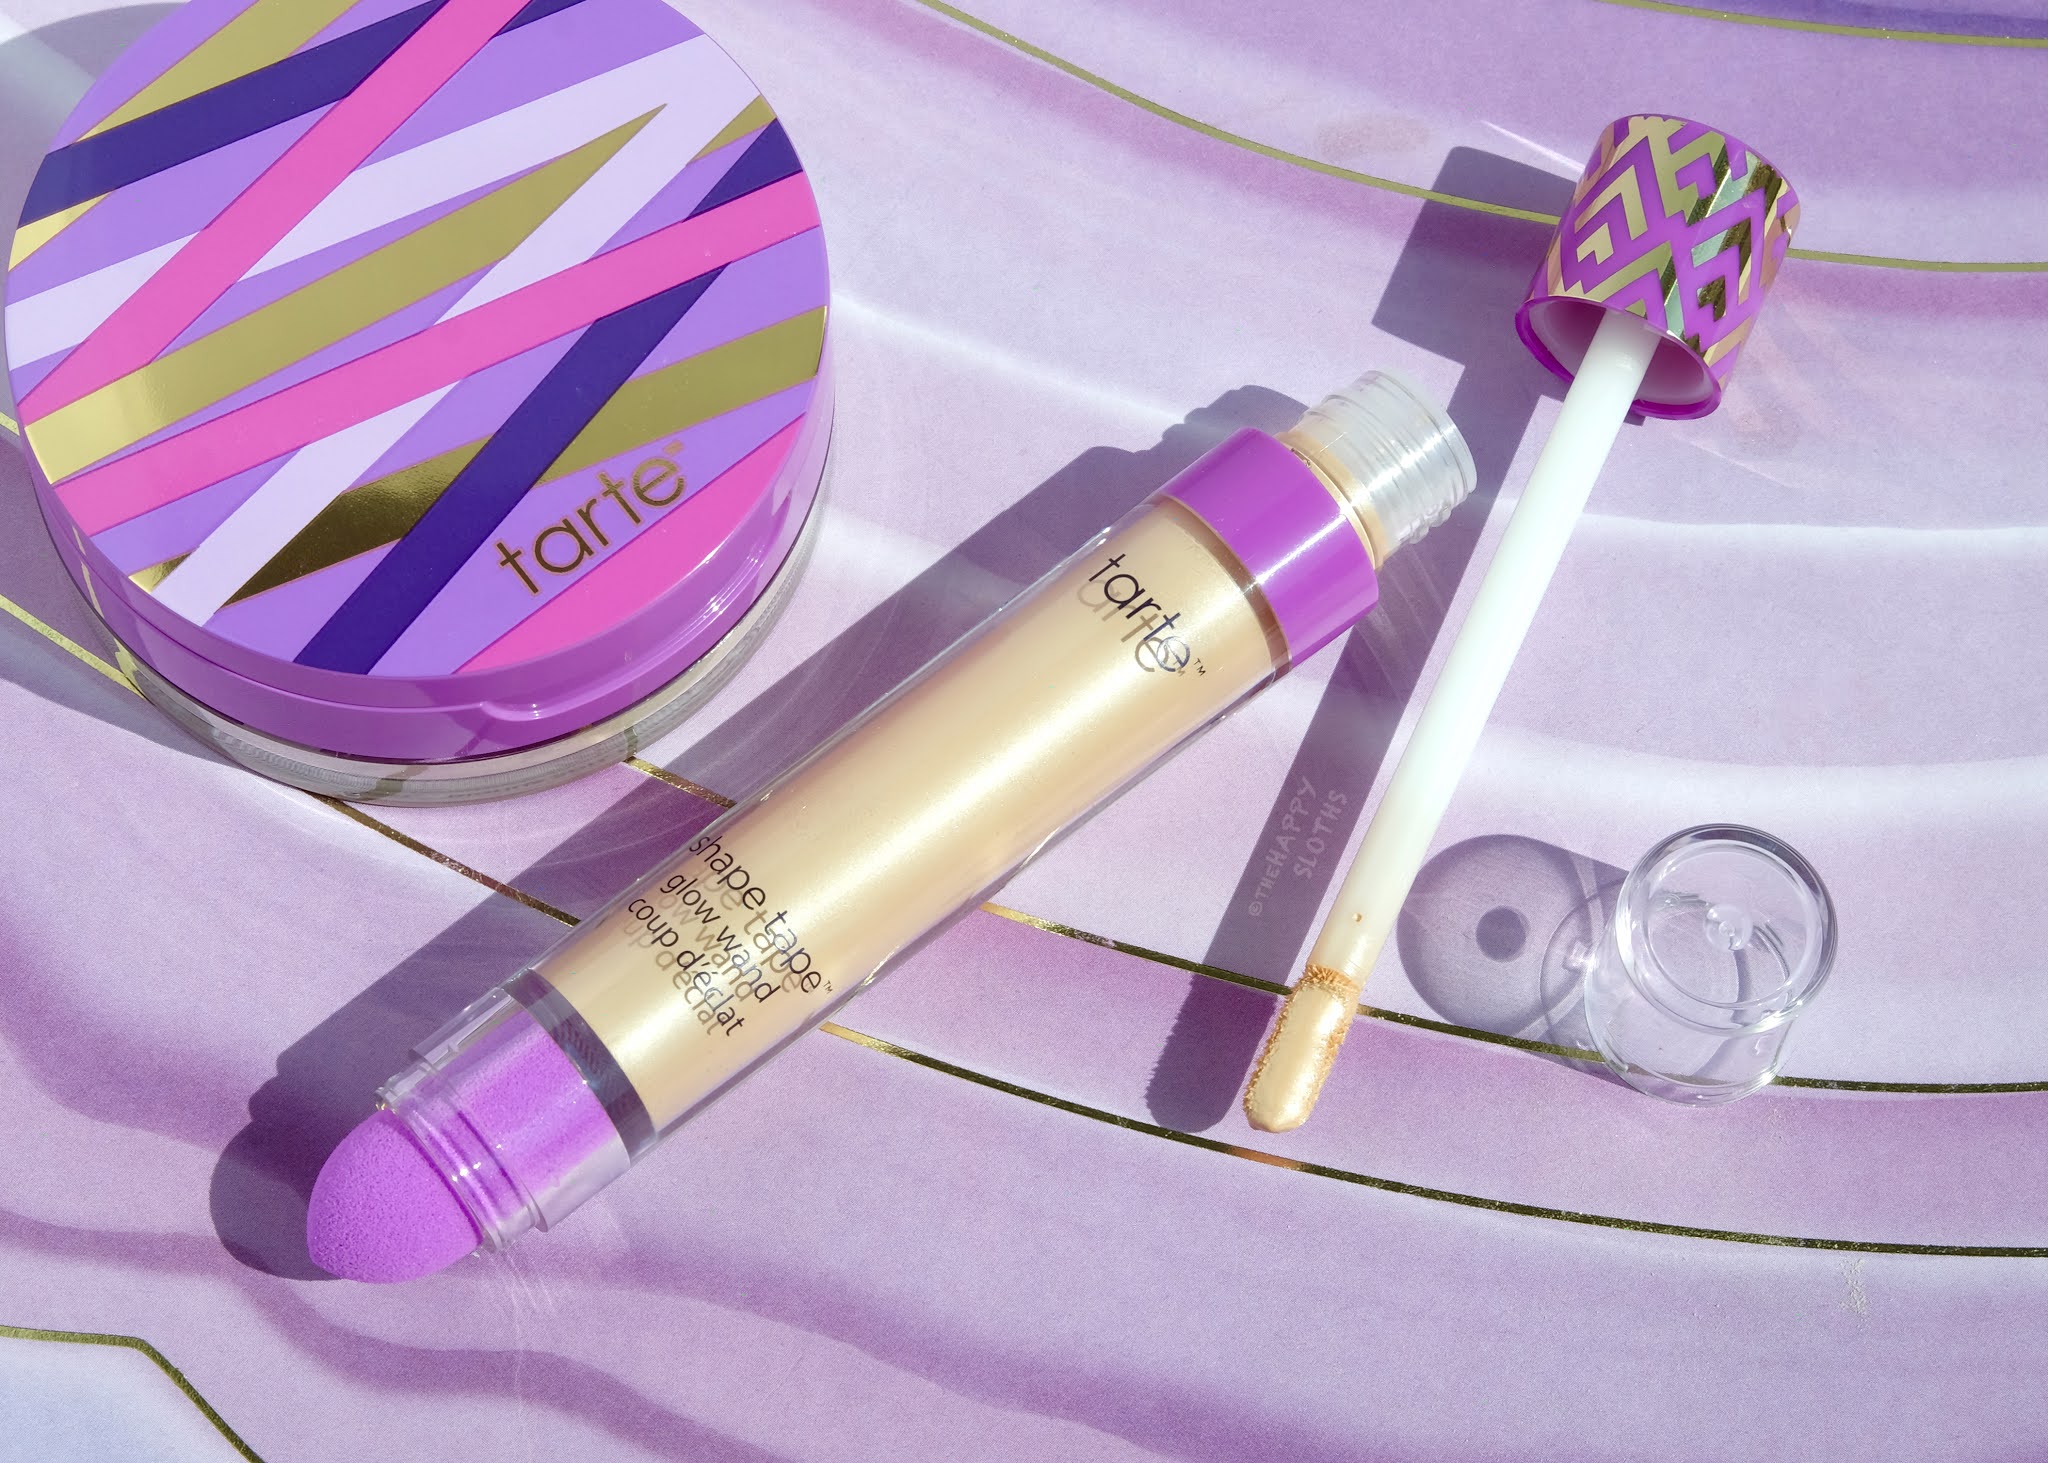 Tarte | Shape Tape Glow Wand in "Alight": Review and Swatches